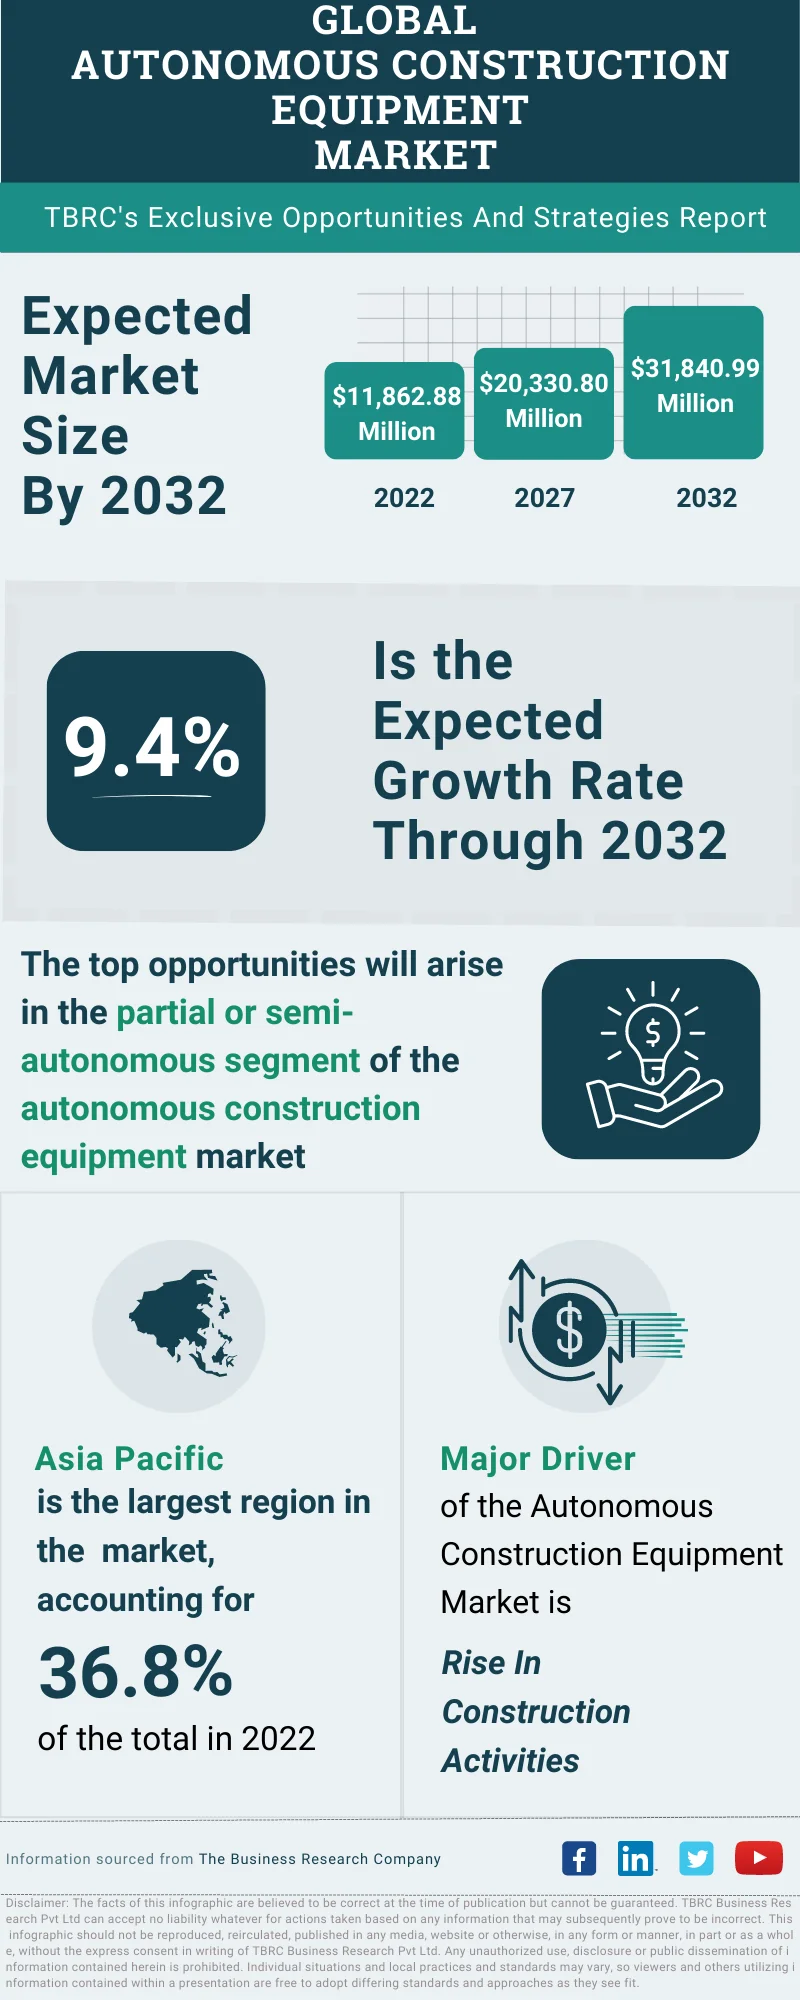 Autonomous Construction Equipment Global Market Opportunities And Strategies To 2032